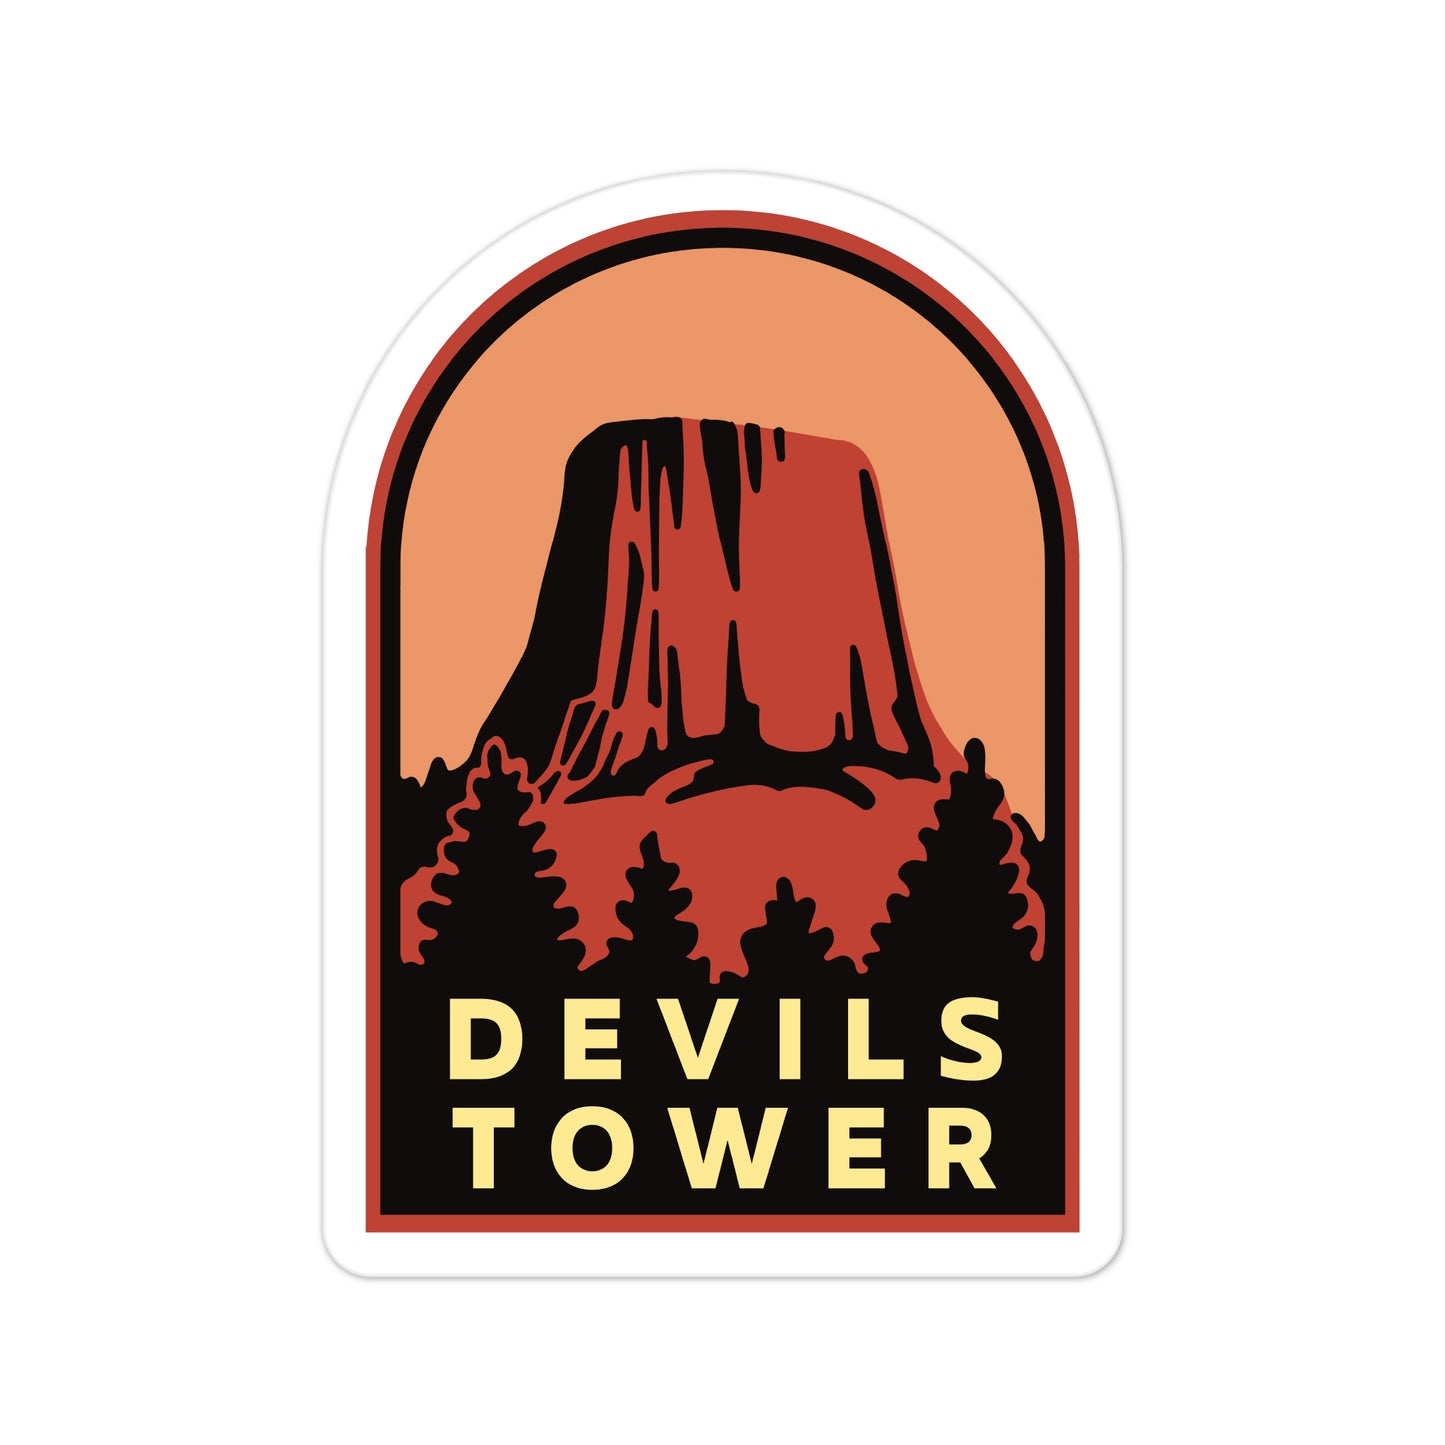 A sticker of Devils Tower Wyoming